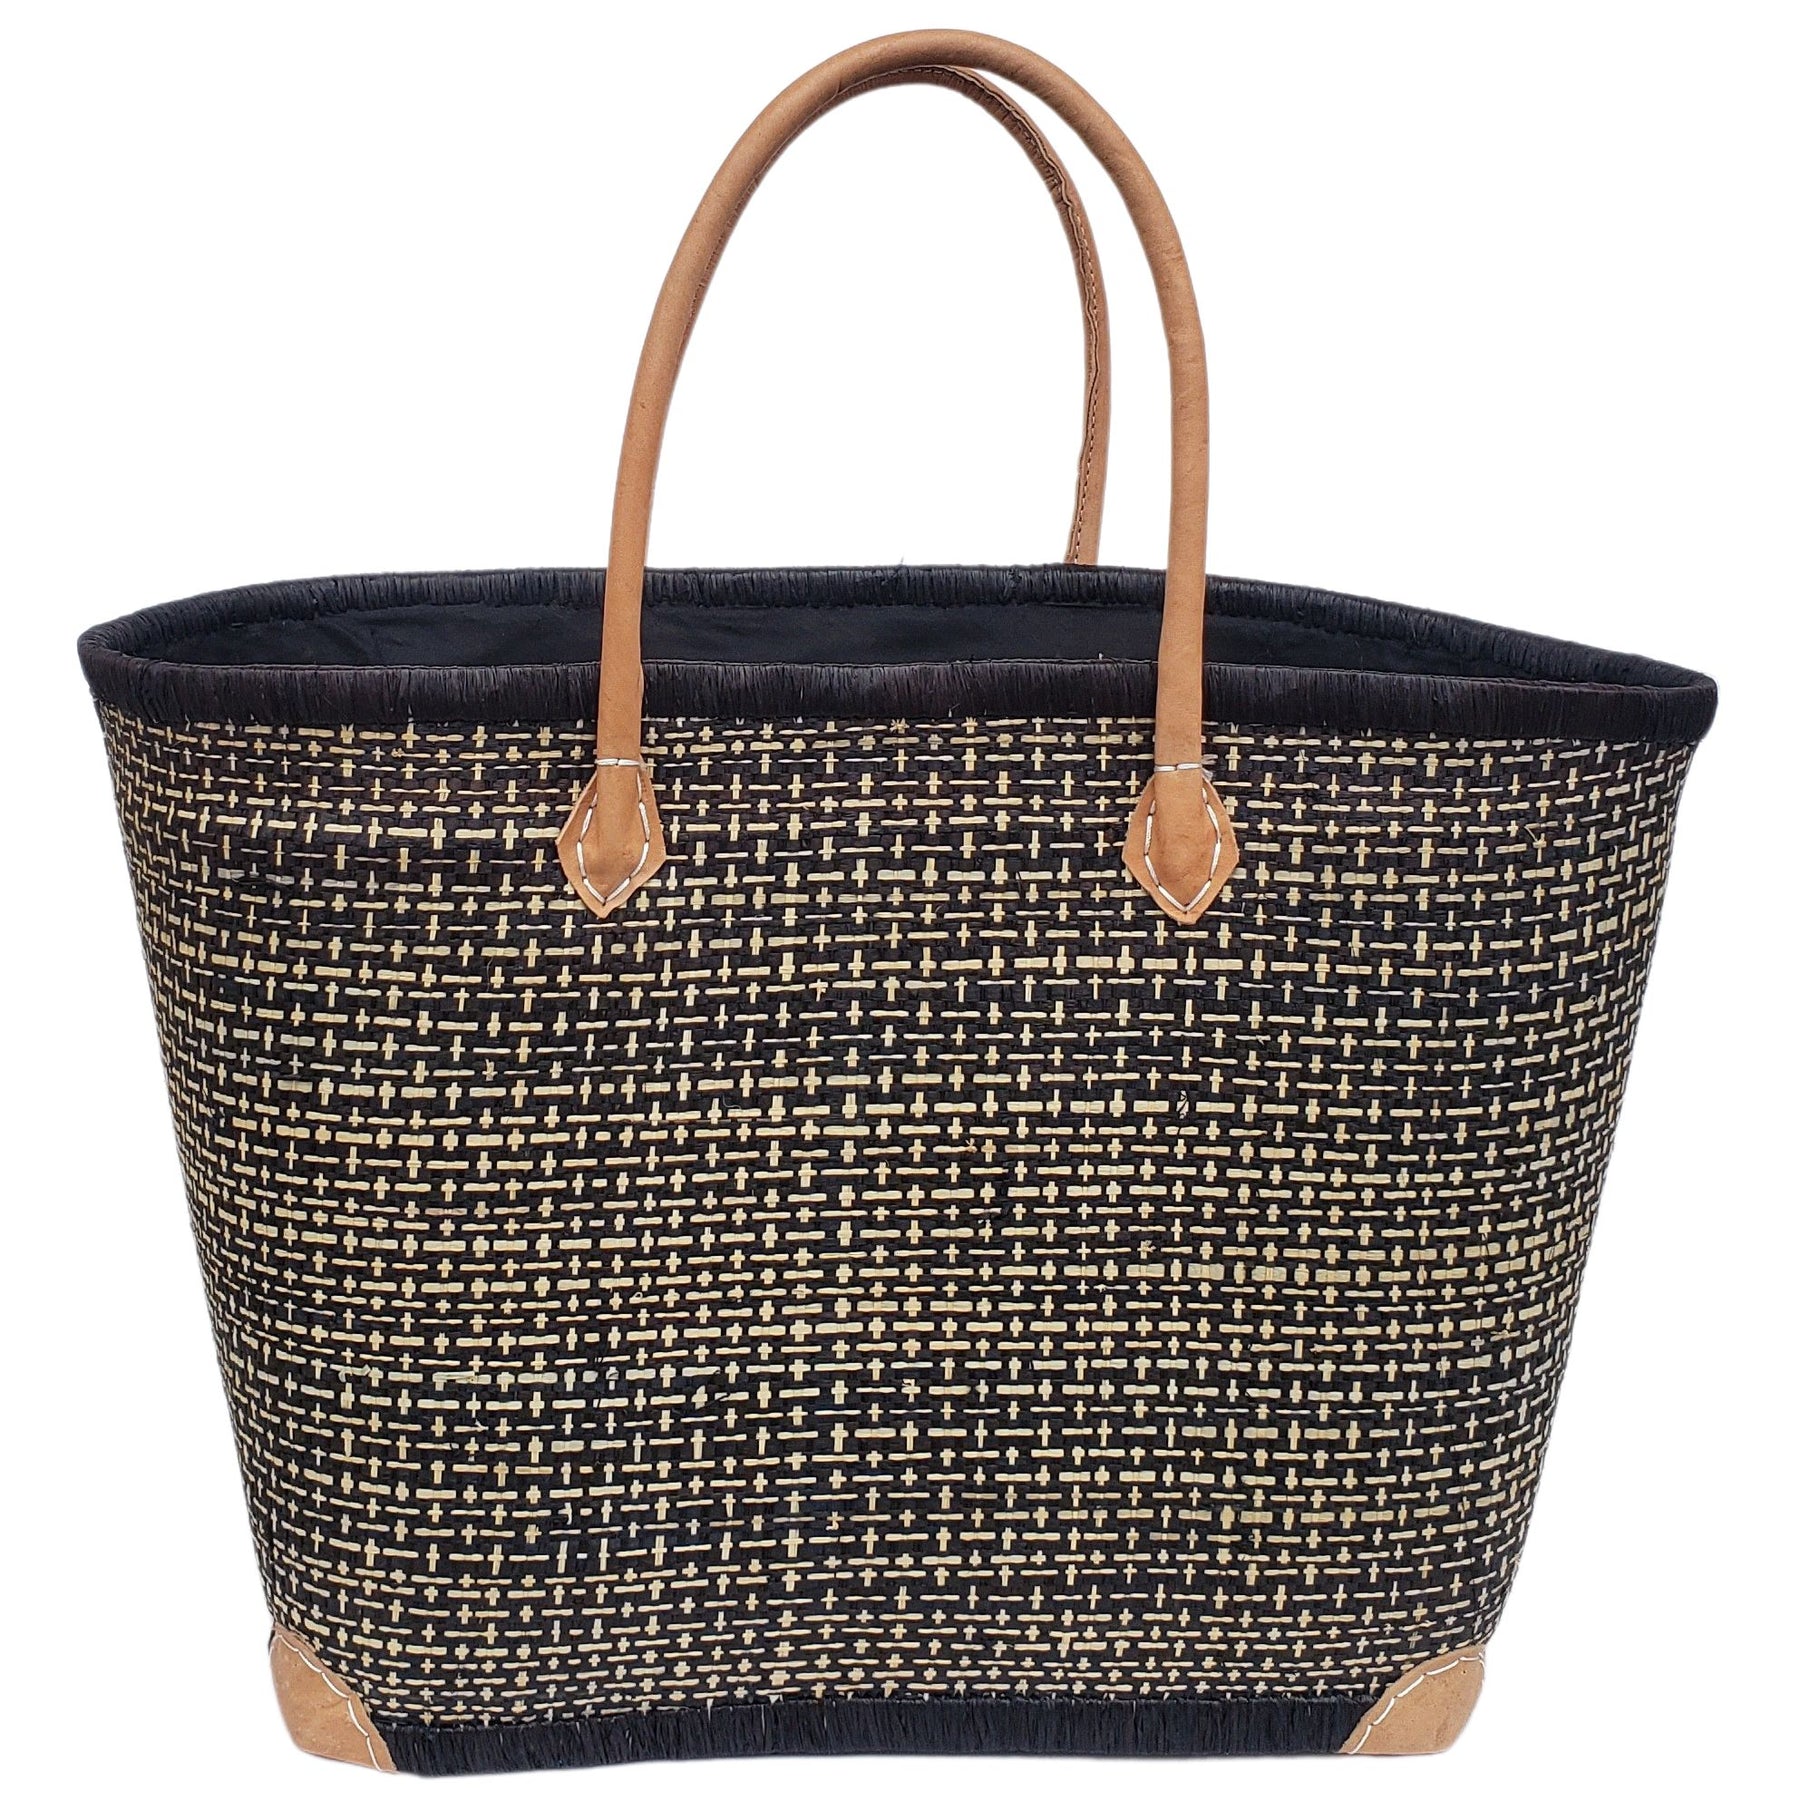 25 of 59: Adjanie: Authentic Madagascar Raffia and Leather Tote Bag (Black and Natural)